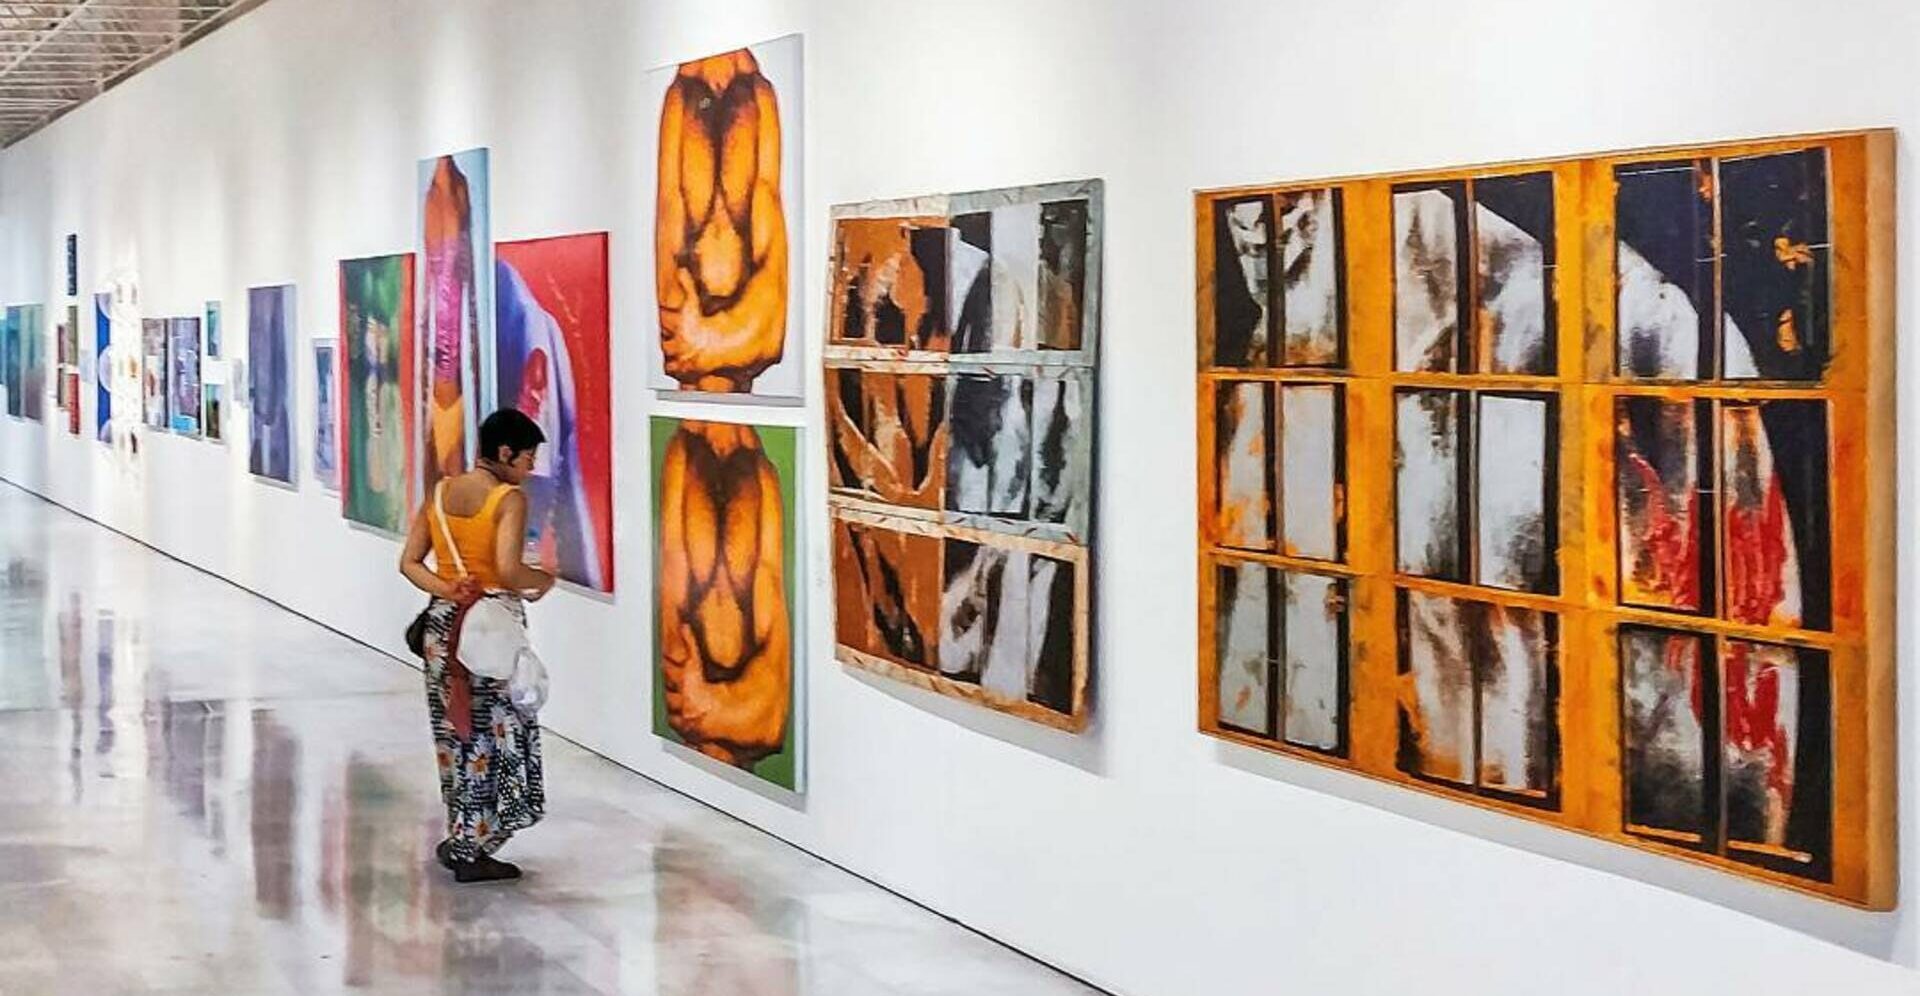 NYC Galleries Curated by Black Women You Should Visit